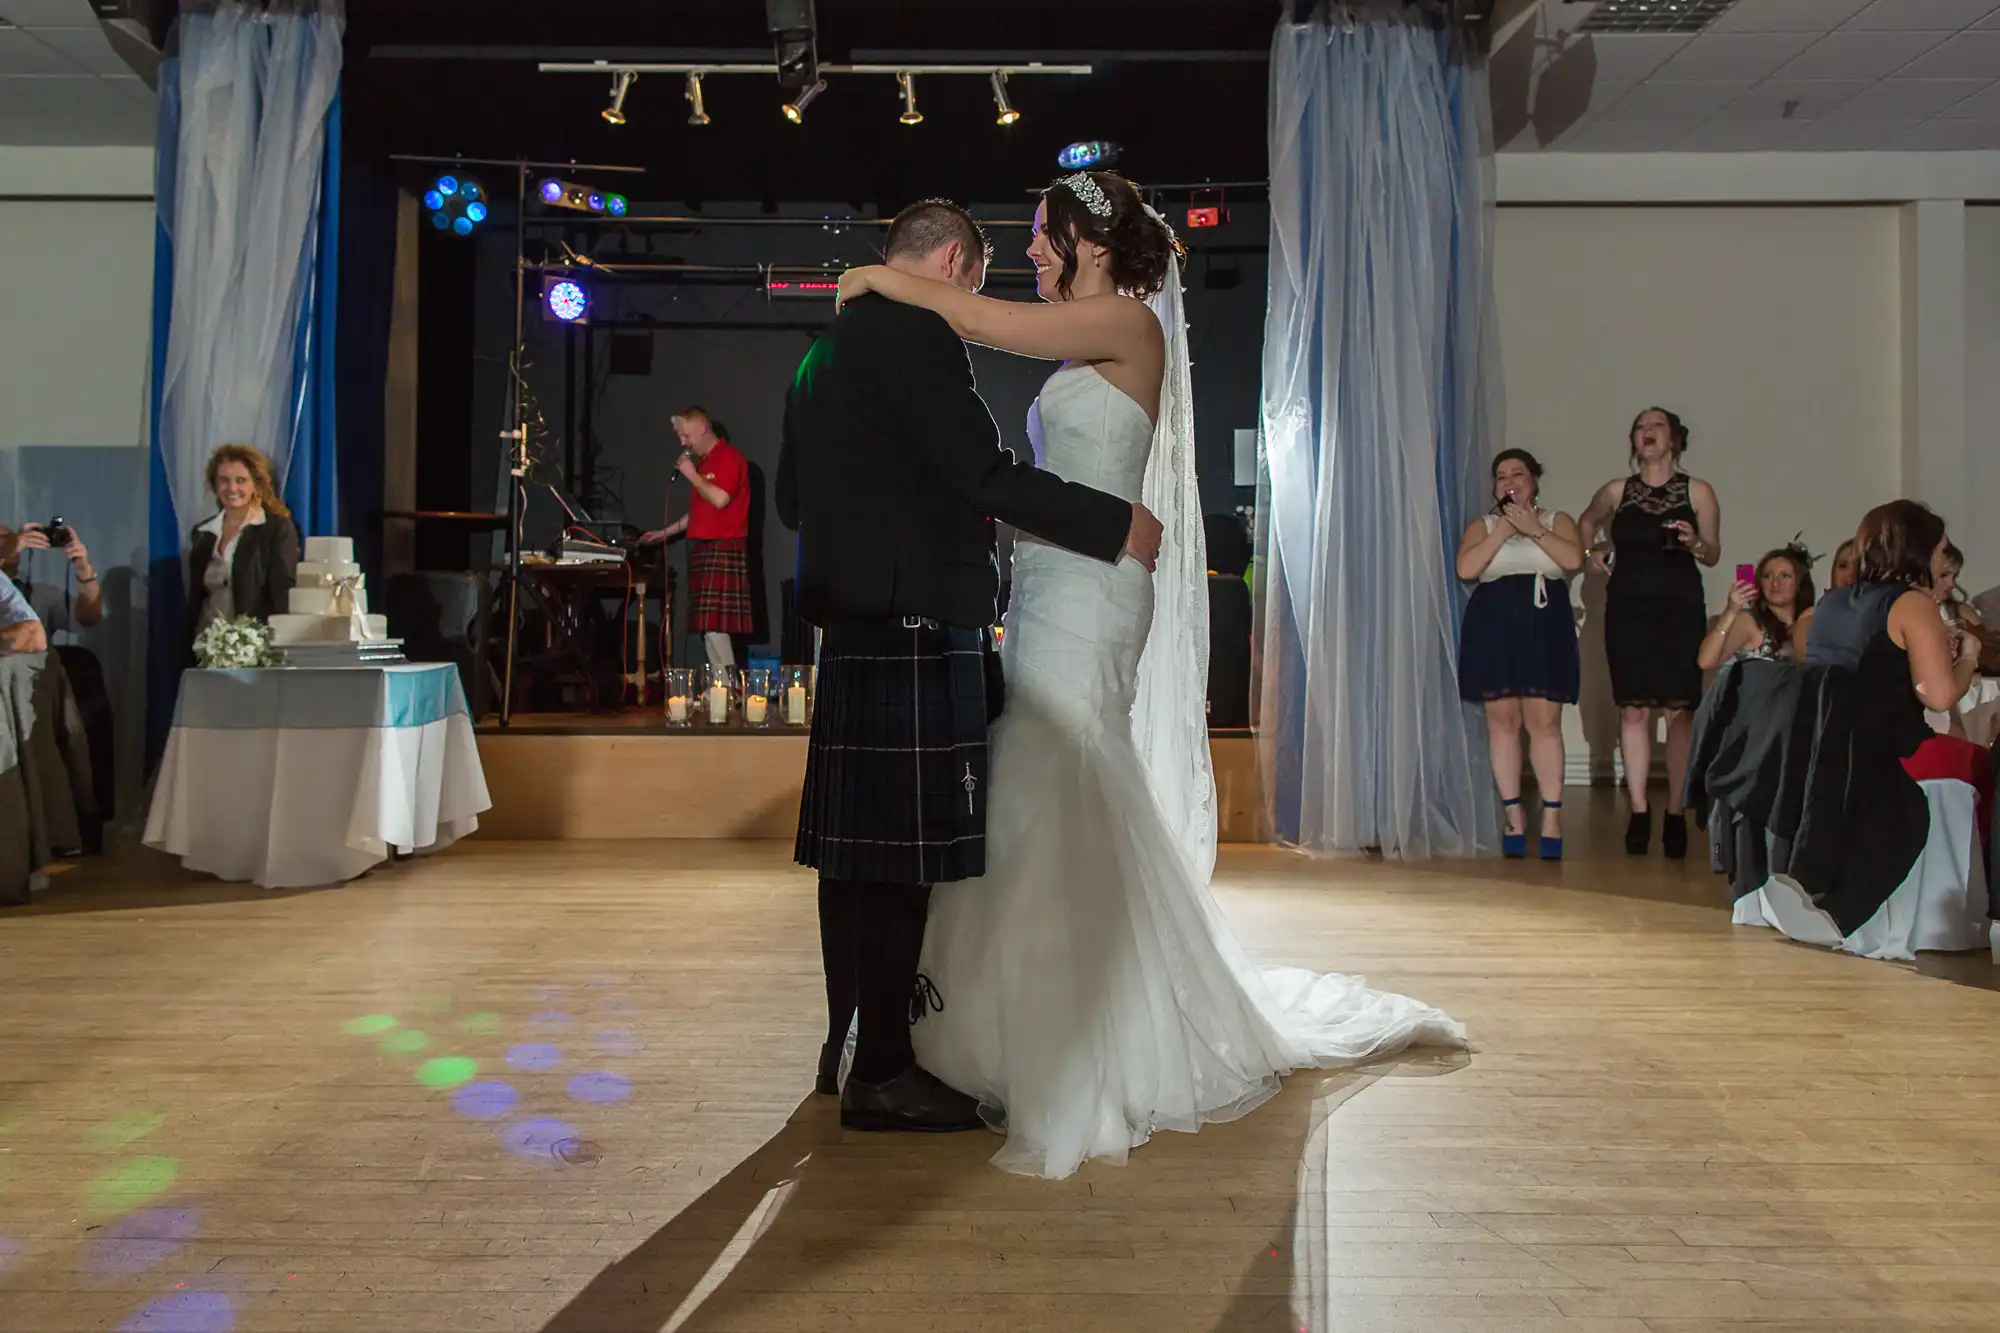 A bride and groom share their first dance at a wedding reception, with guests watching in a decorated hall. the groom wears a kilt; colorful lights dot the dance floor.